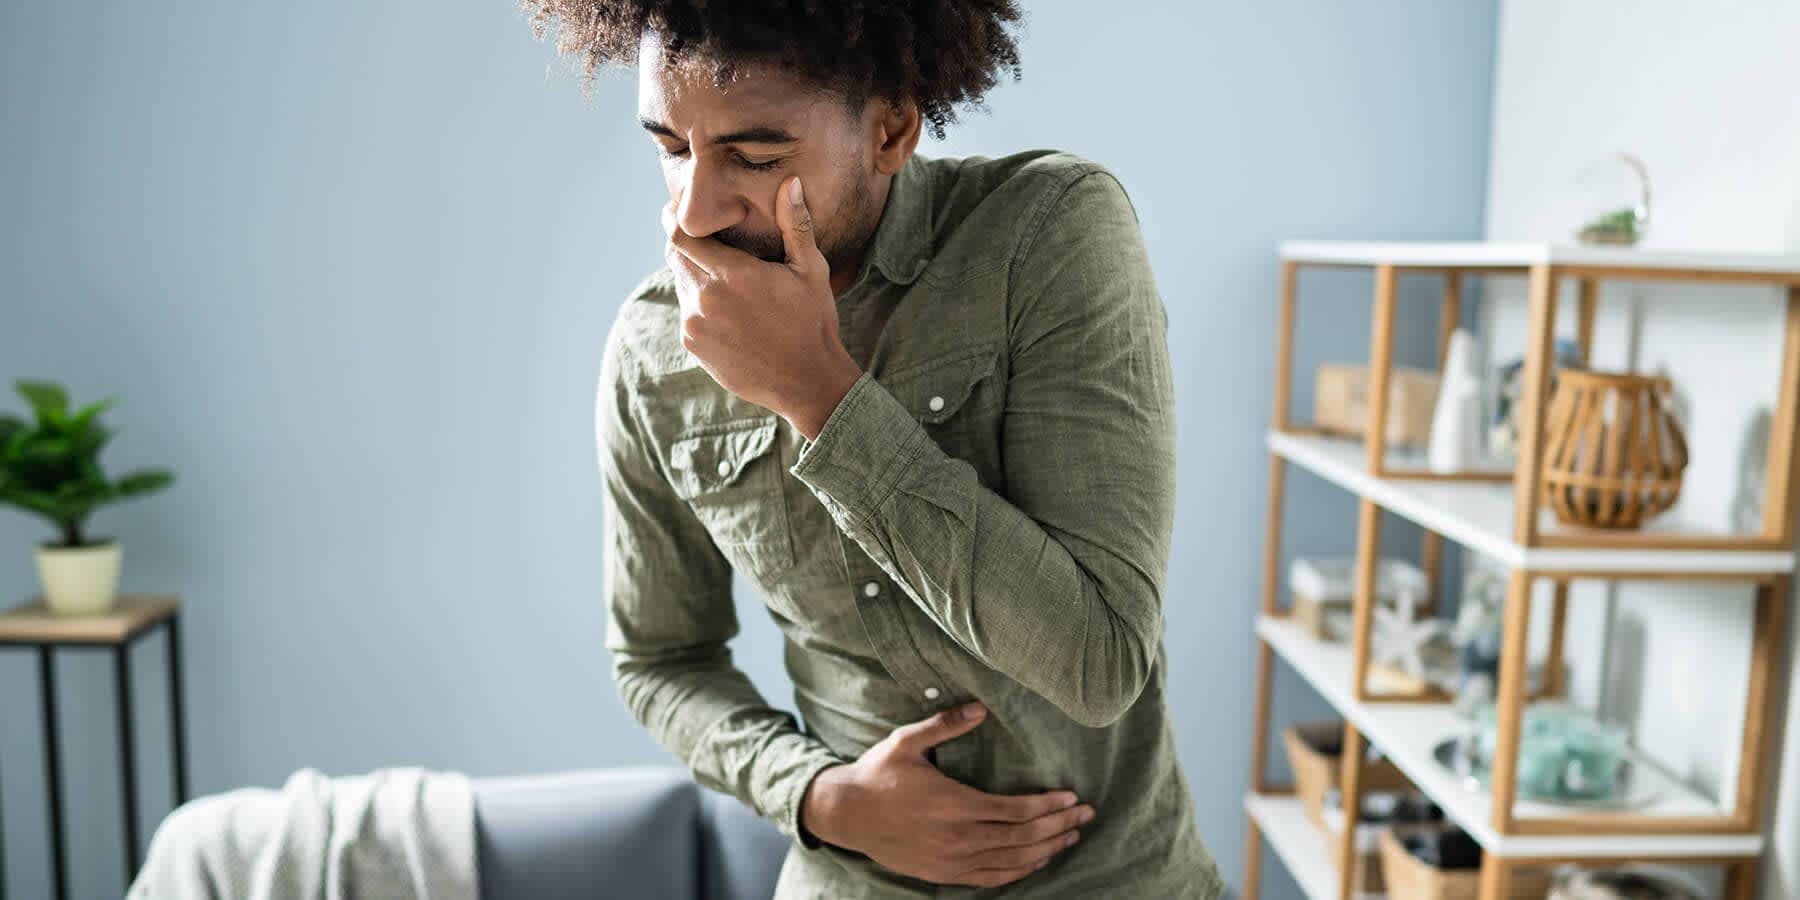 Man experiencing uncomfortable symptoms and wondering about the difference between indigestion vs. heartburn